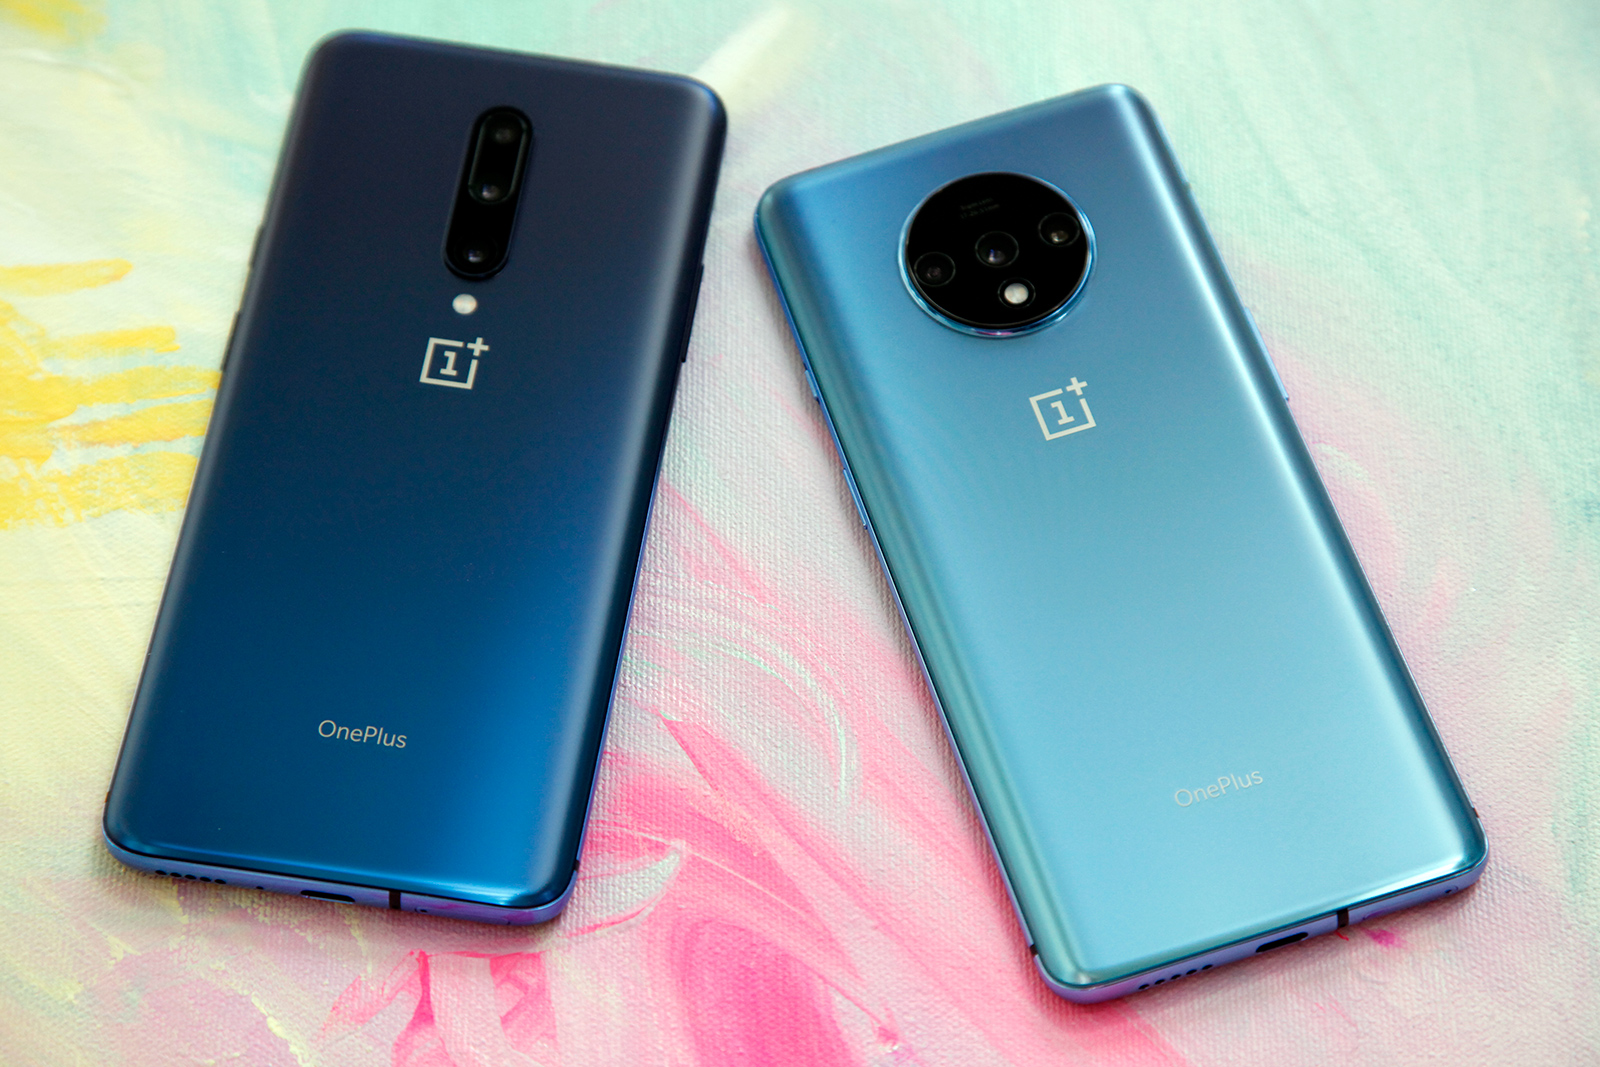 This is our first look OnePlus’ new concept phone, with an ‘invisible’ camera and colorshifting